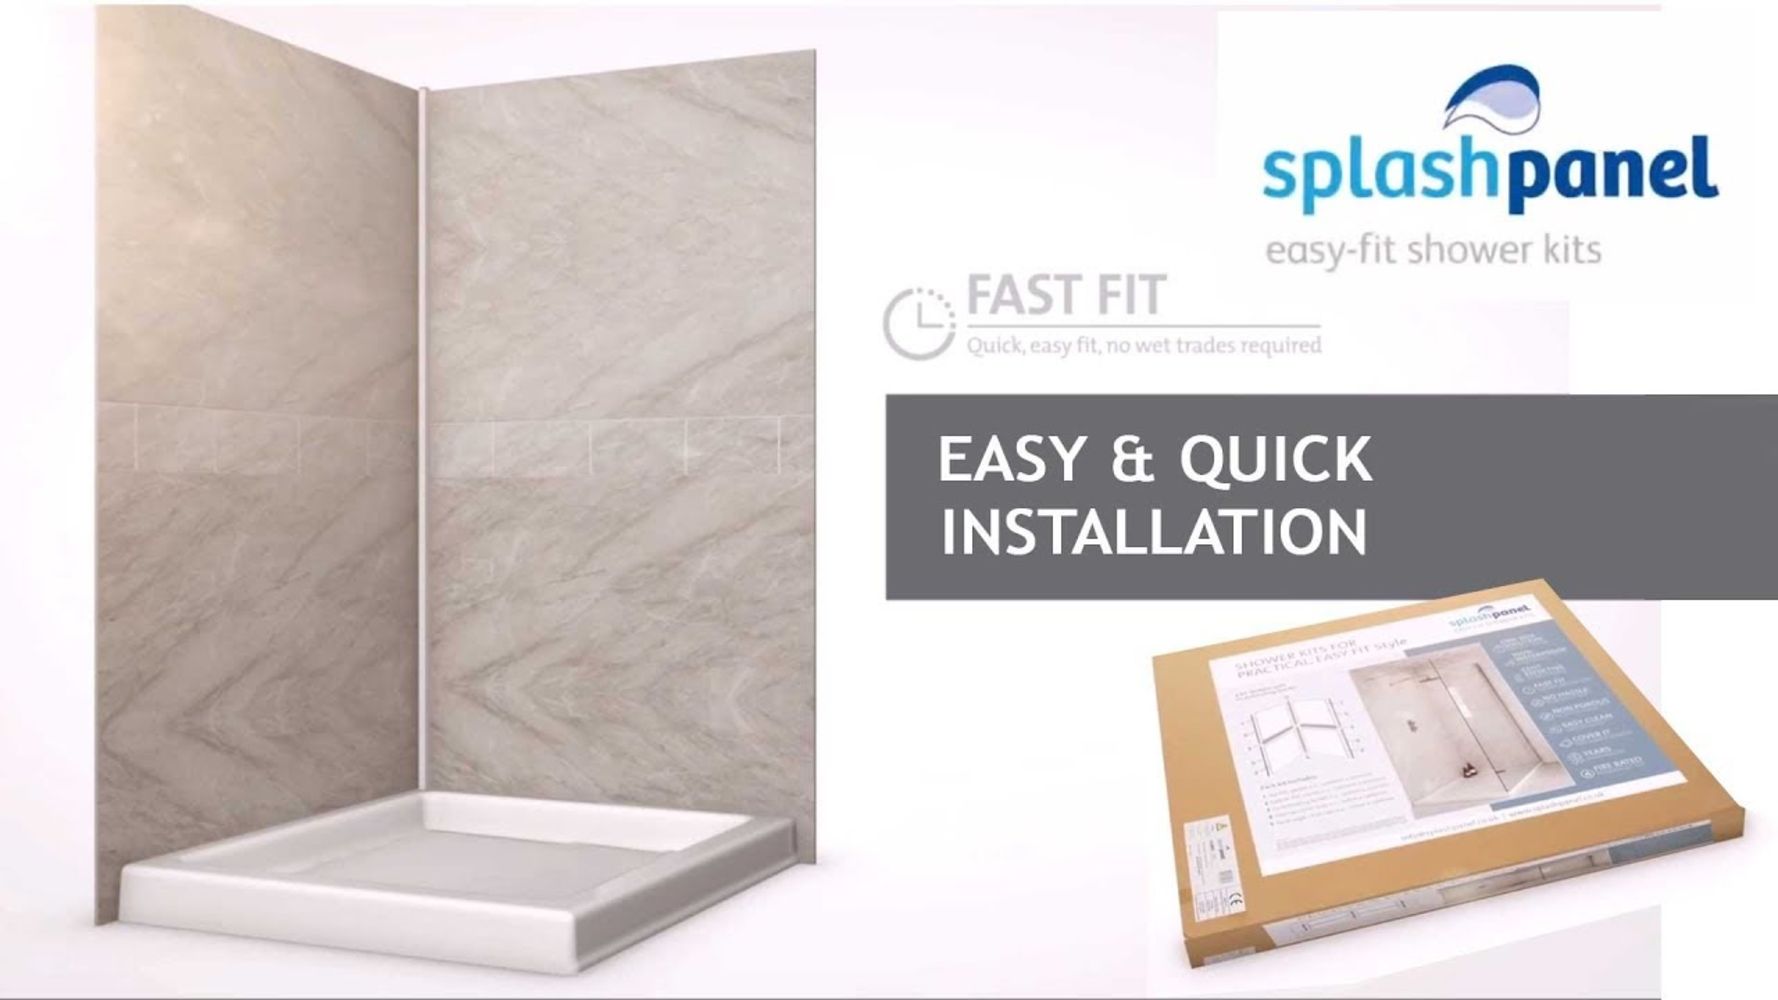 Pallets of Splash Panel shower kits, all new, Starts at 5% of retail to clear.